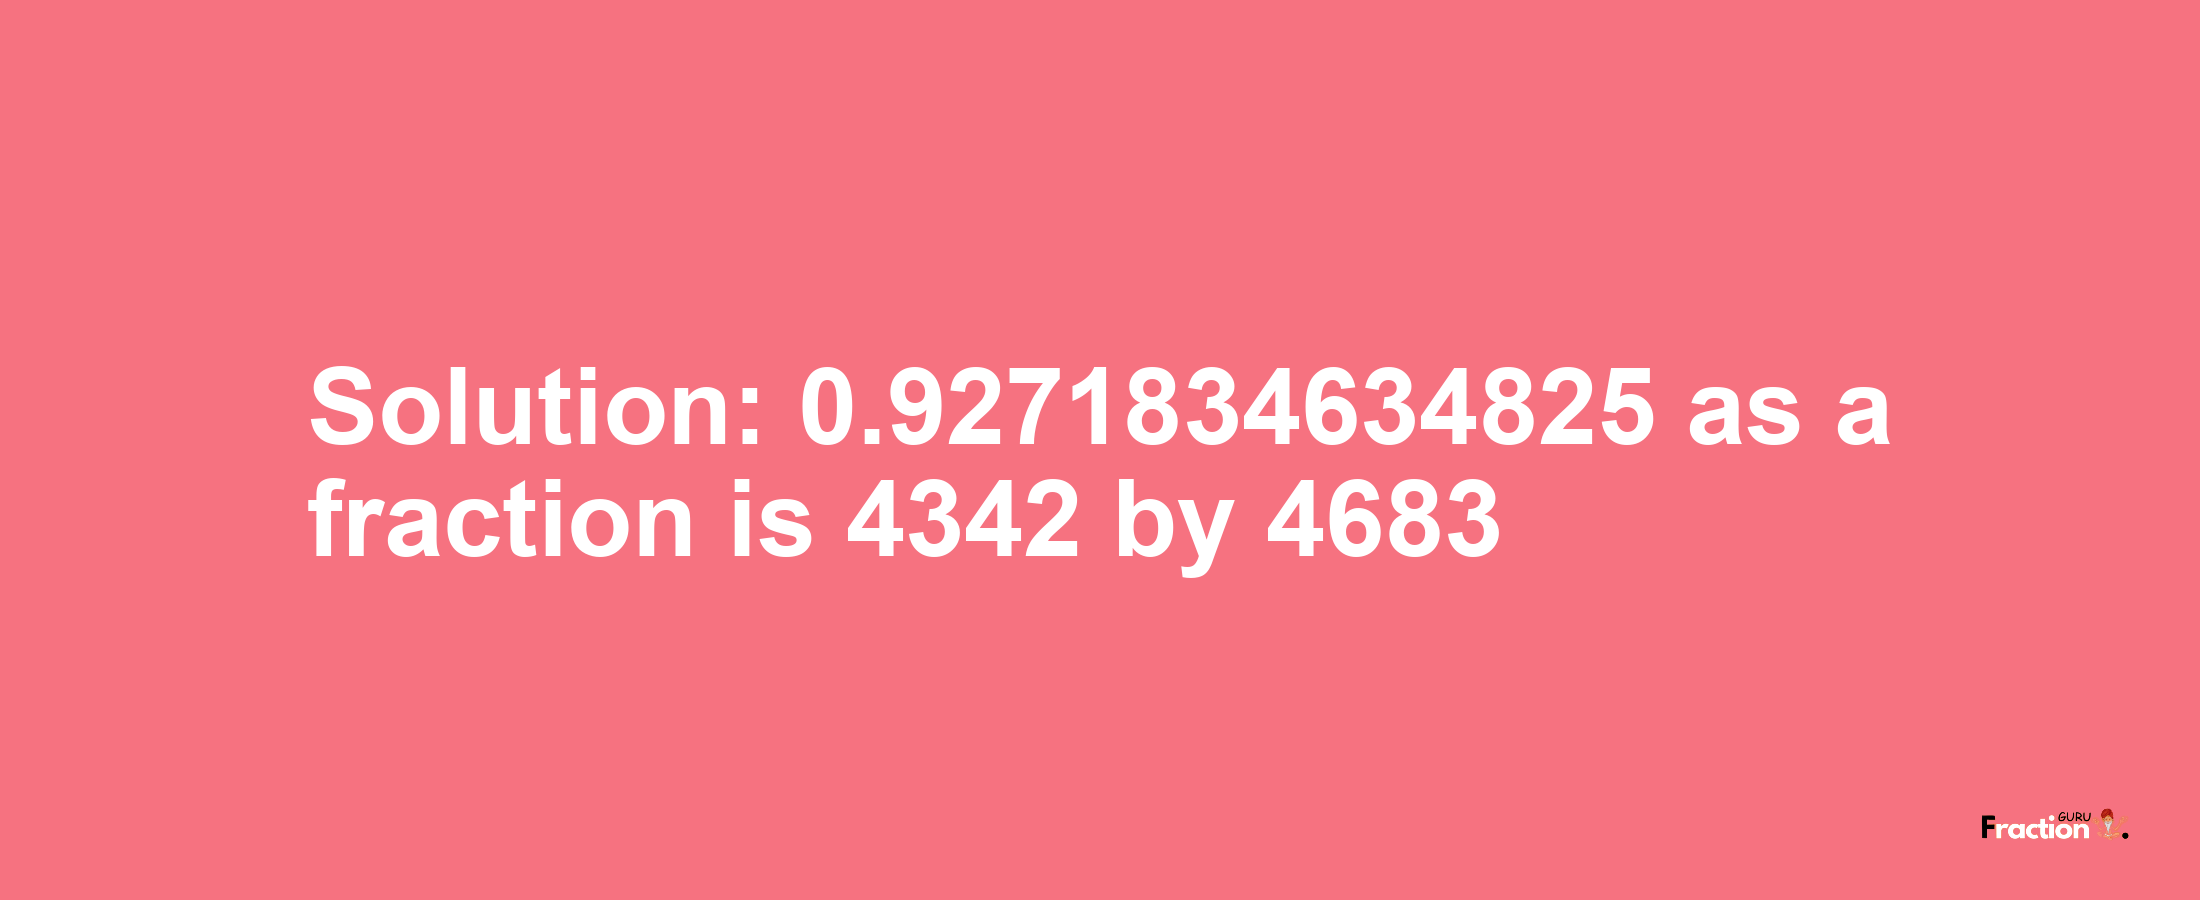 Solution:0.9271834634825 as a fraction is 4342/4683